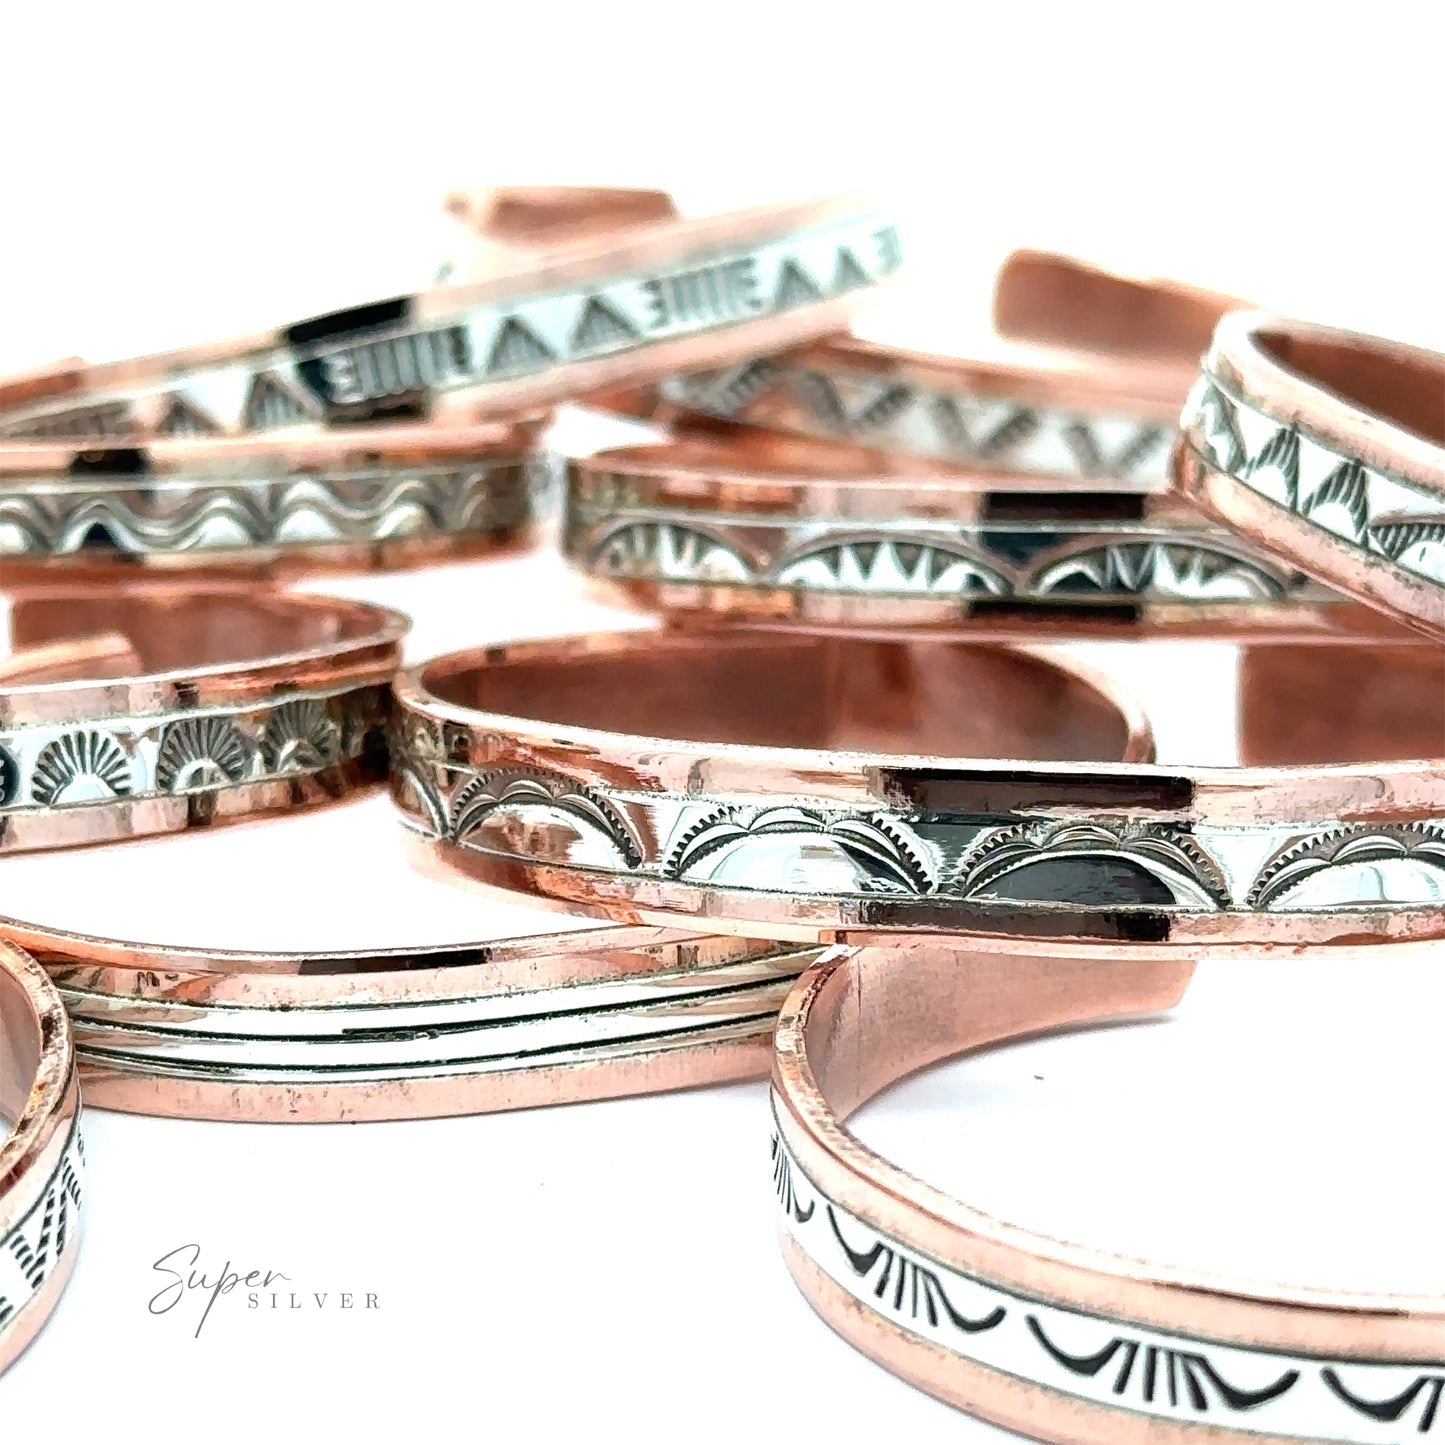 
                  
                    A collection of Native American Handmade Copper And Silver Bracelets with intricate geometric designs arranged on a white surface.
                  
                